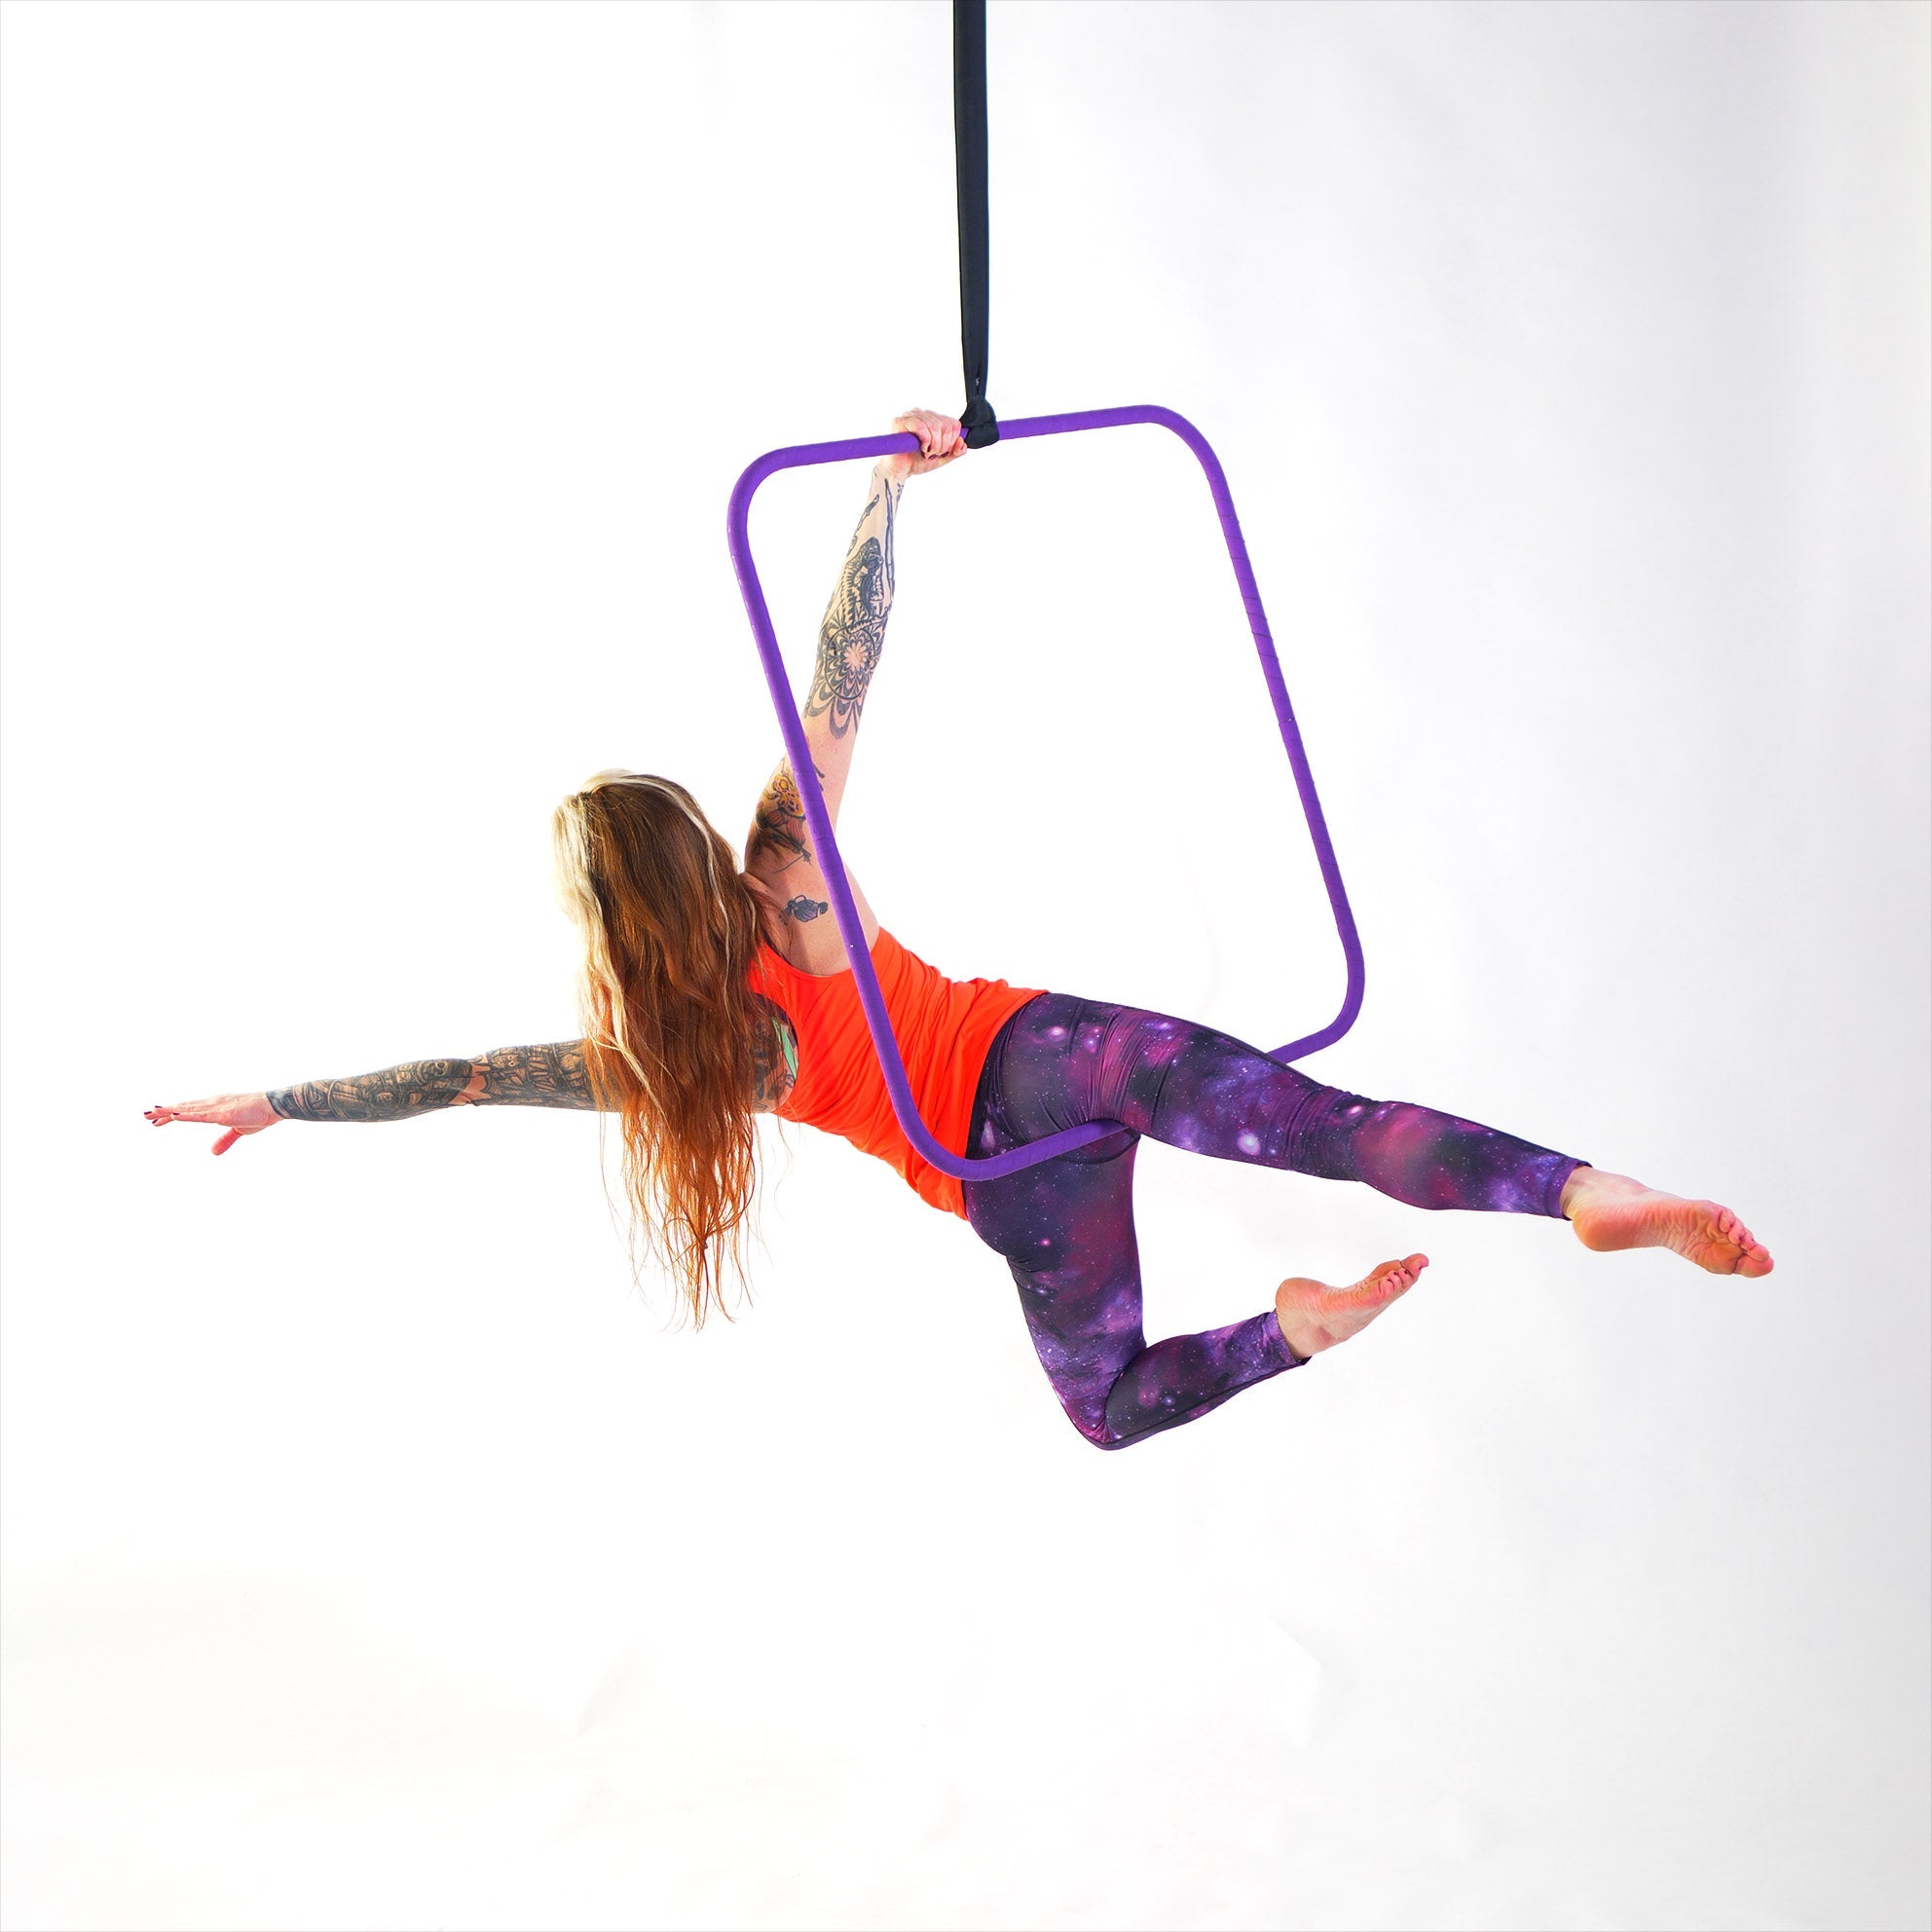 performer in an aerial square